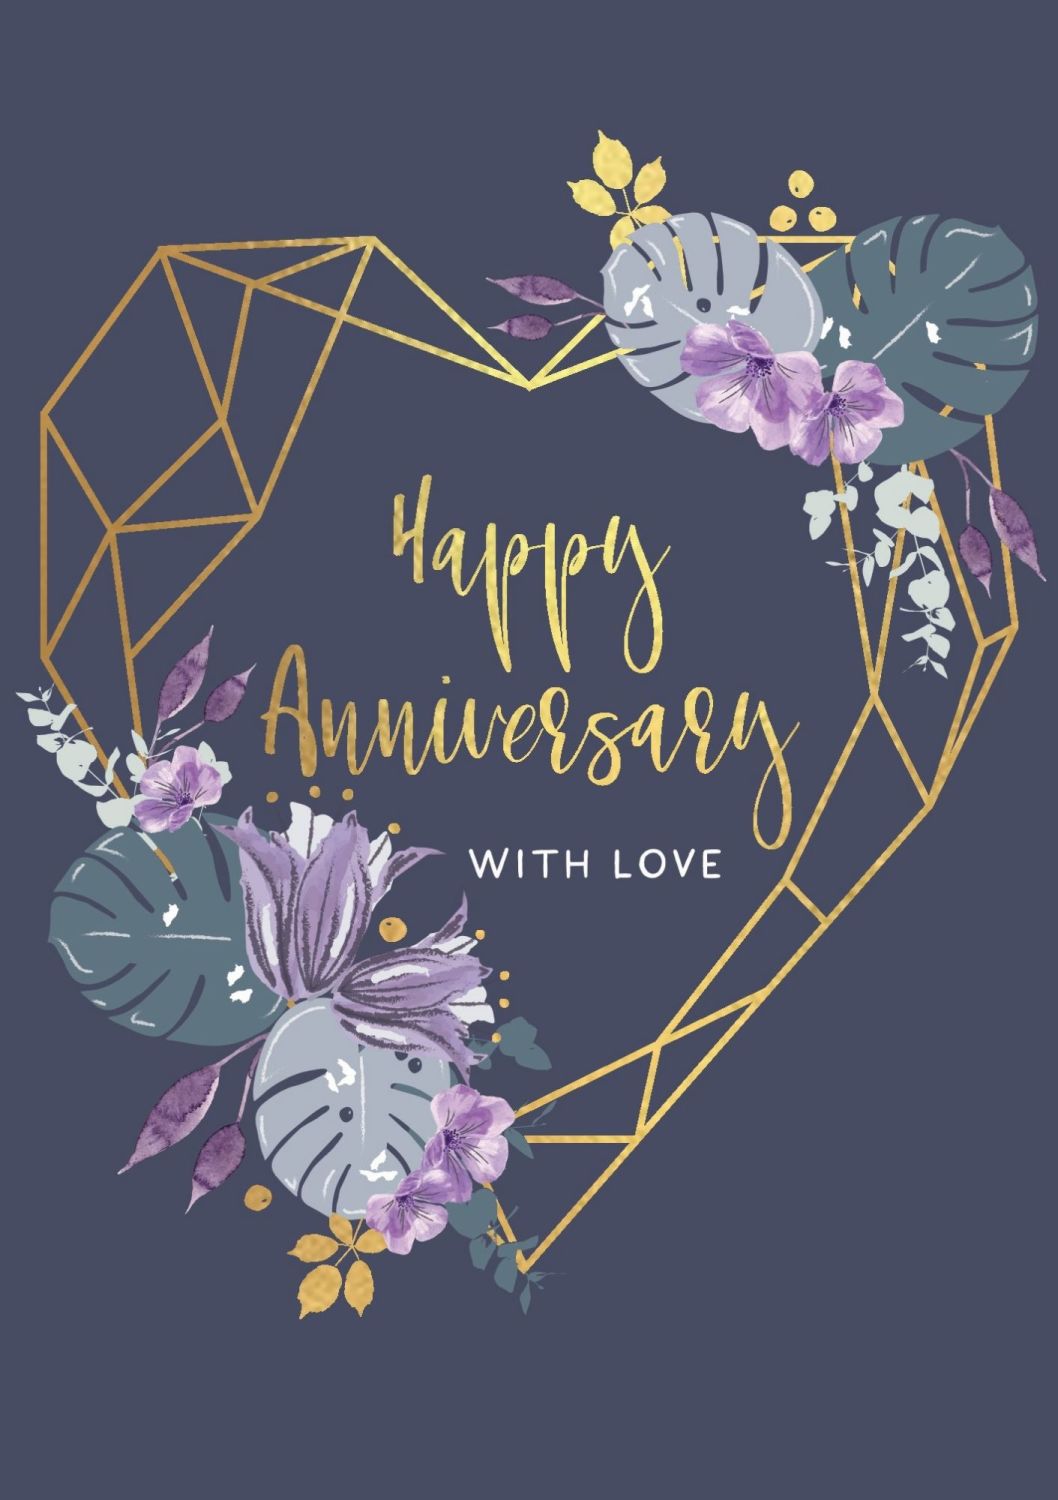 Beautiful Happy Anniversary Image - Daily Quotes